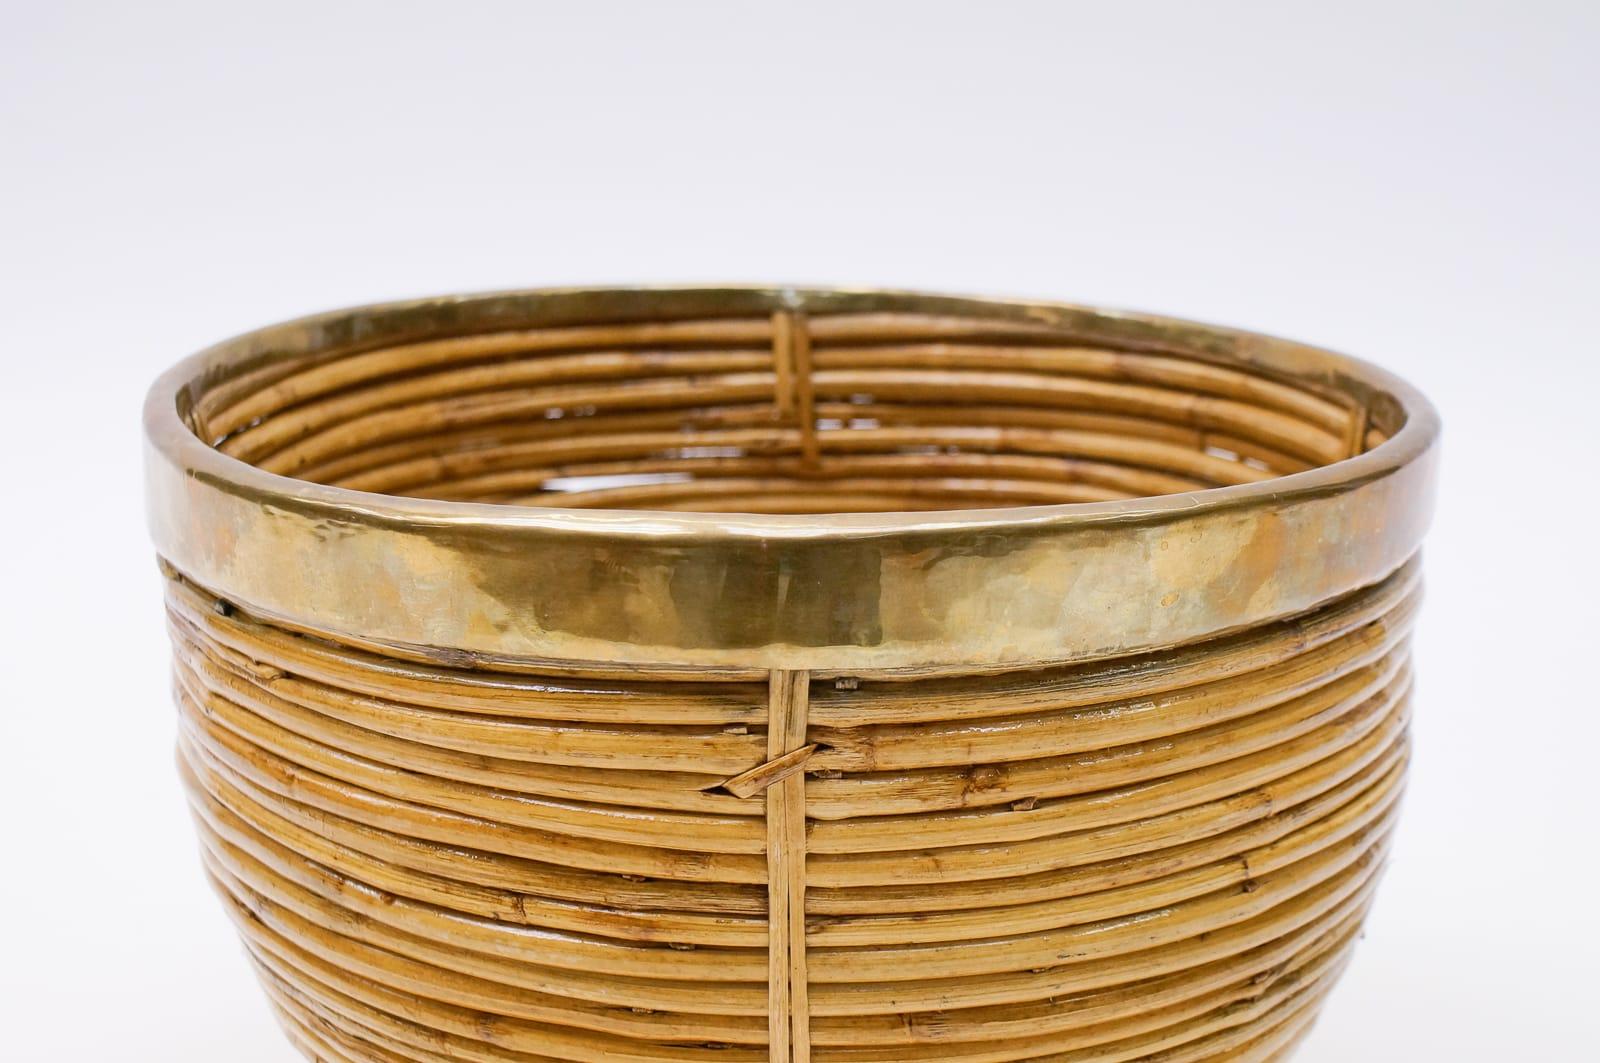 Large Rattan and Brass Midcentury Handcrafted Bowl, Austria, 1950s For Sale 2